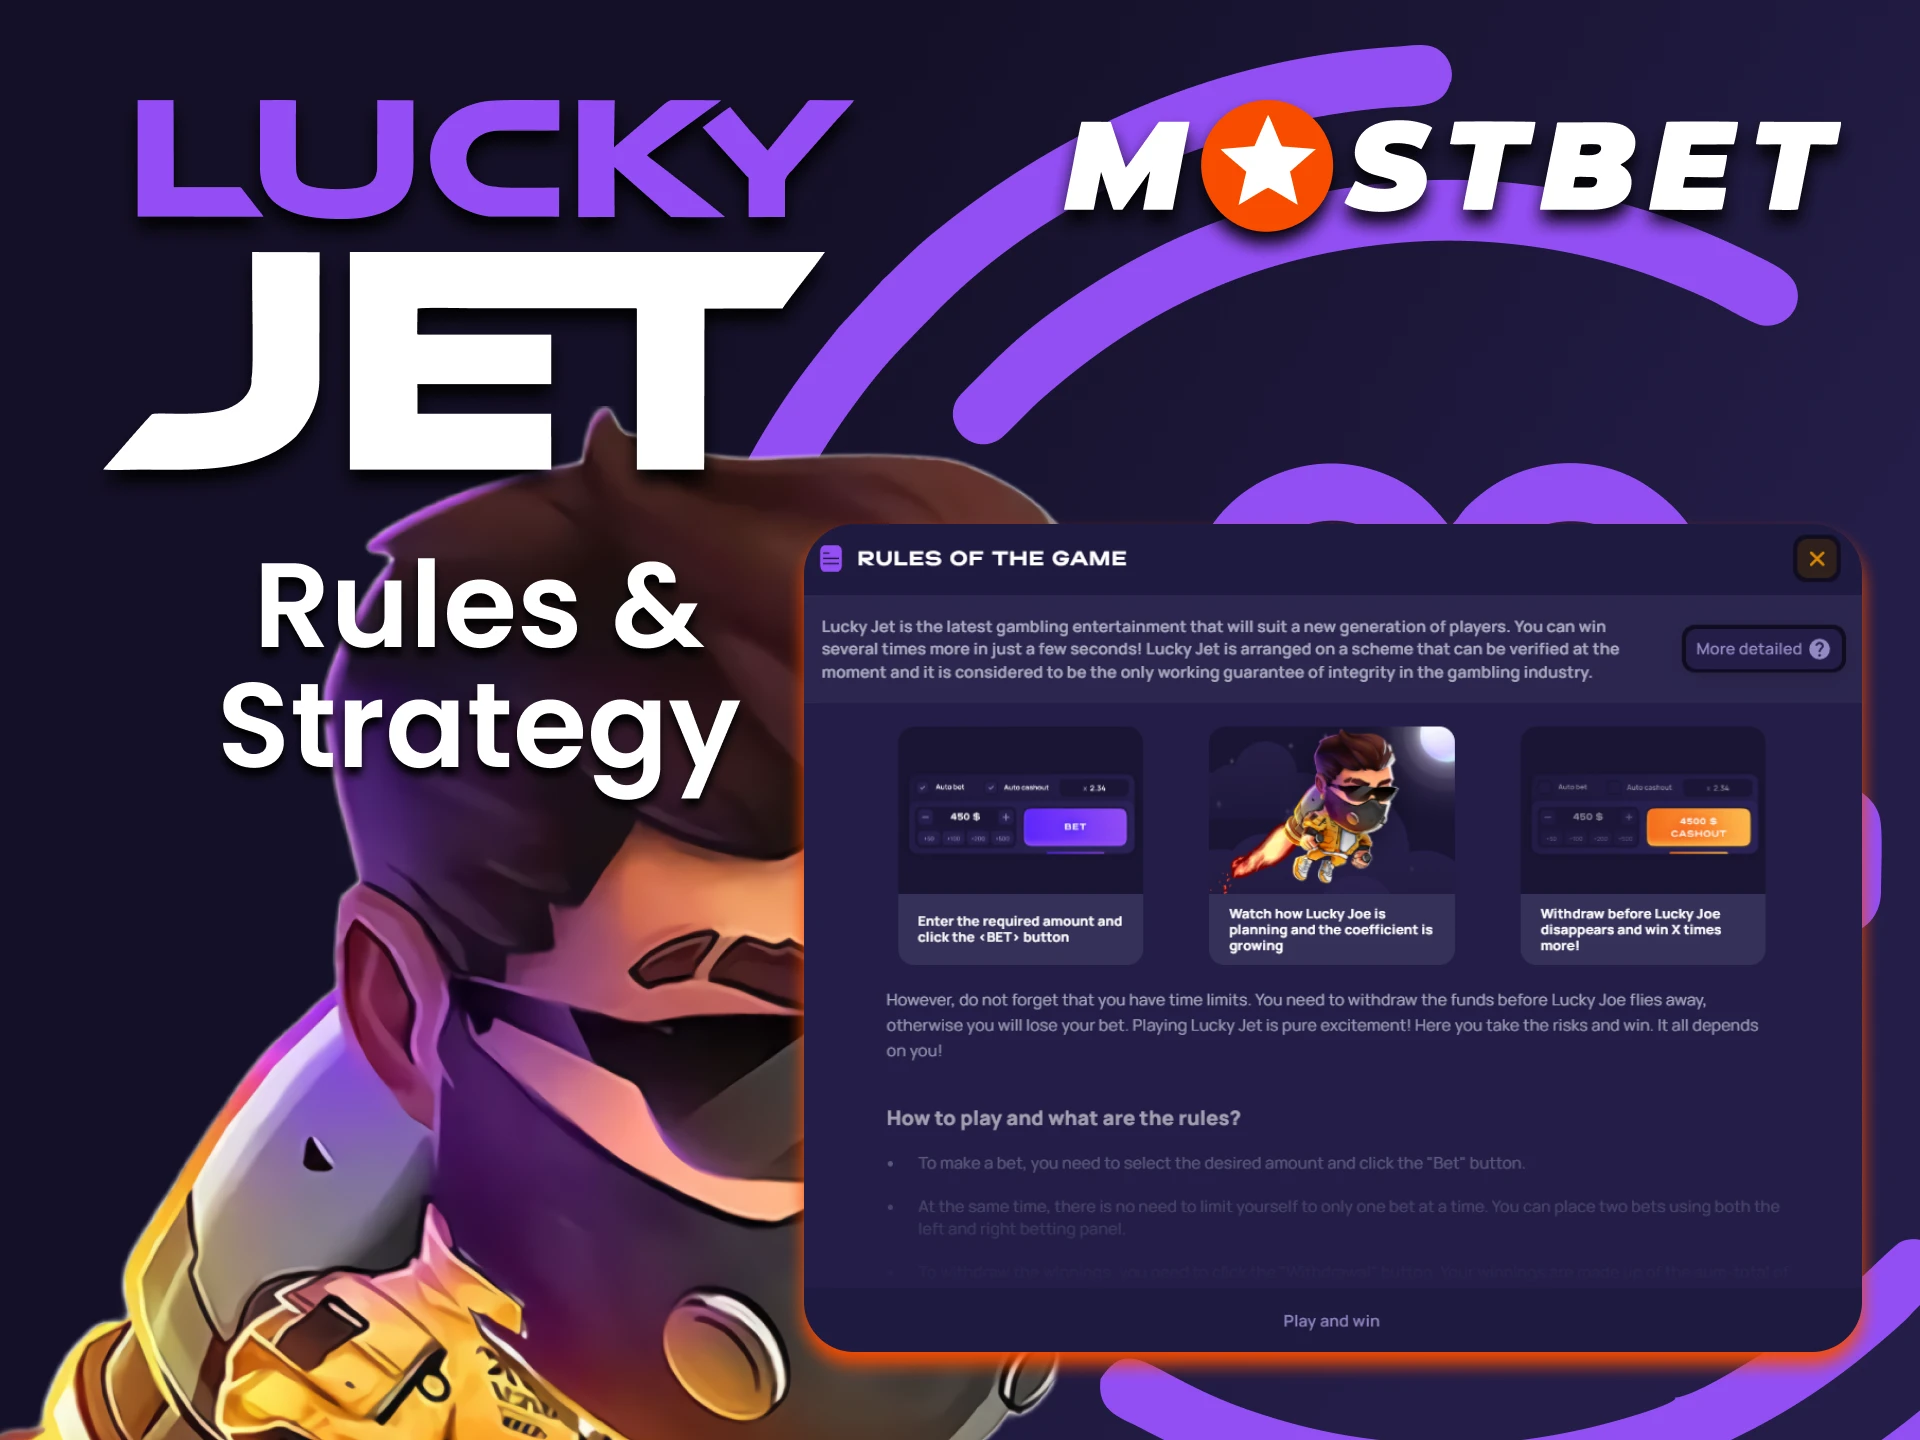 Learn the rules of the Lucky Jet game at Mostbet.